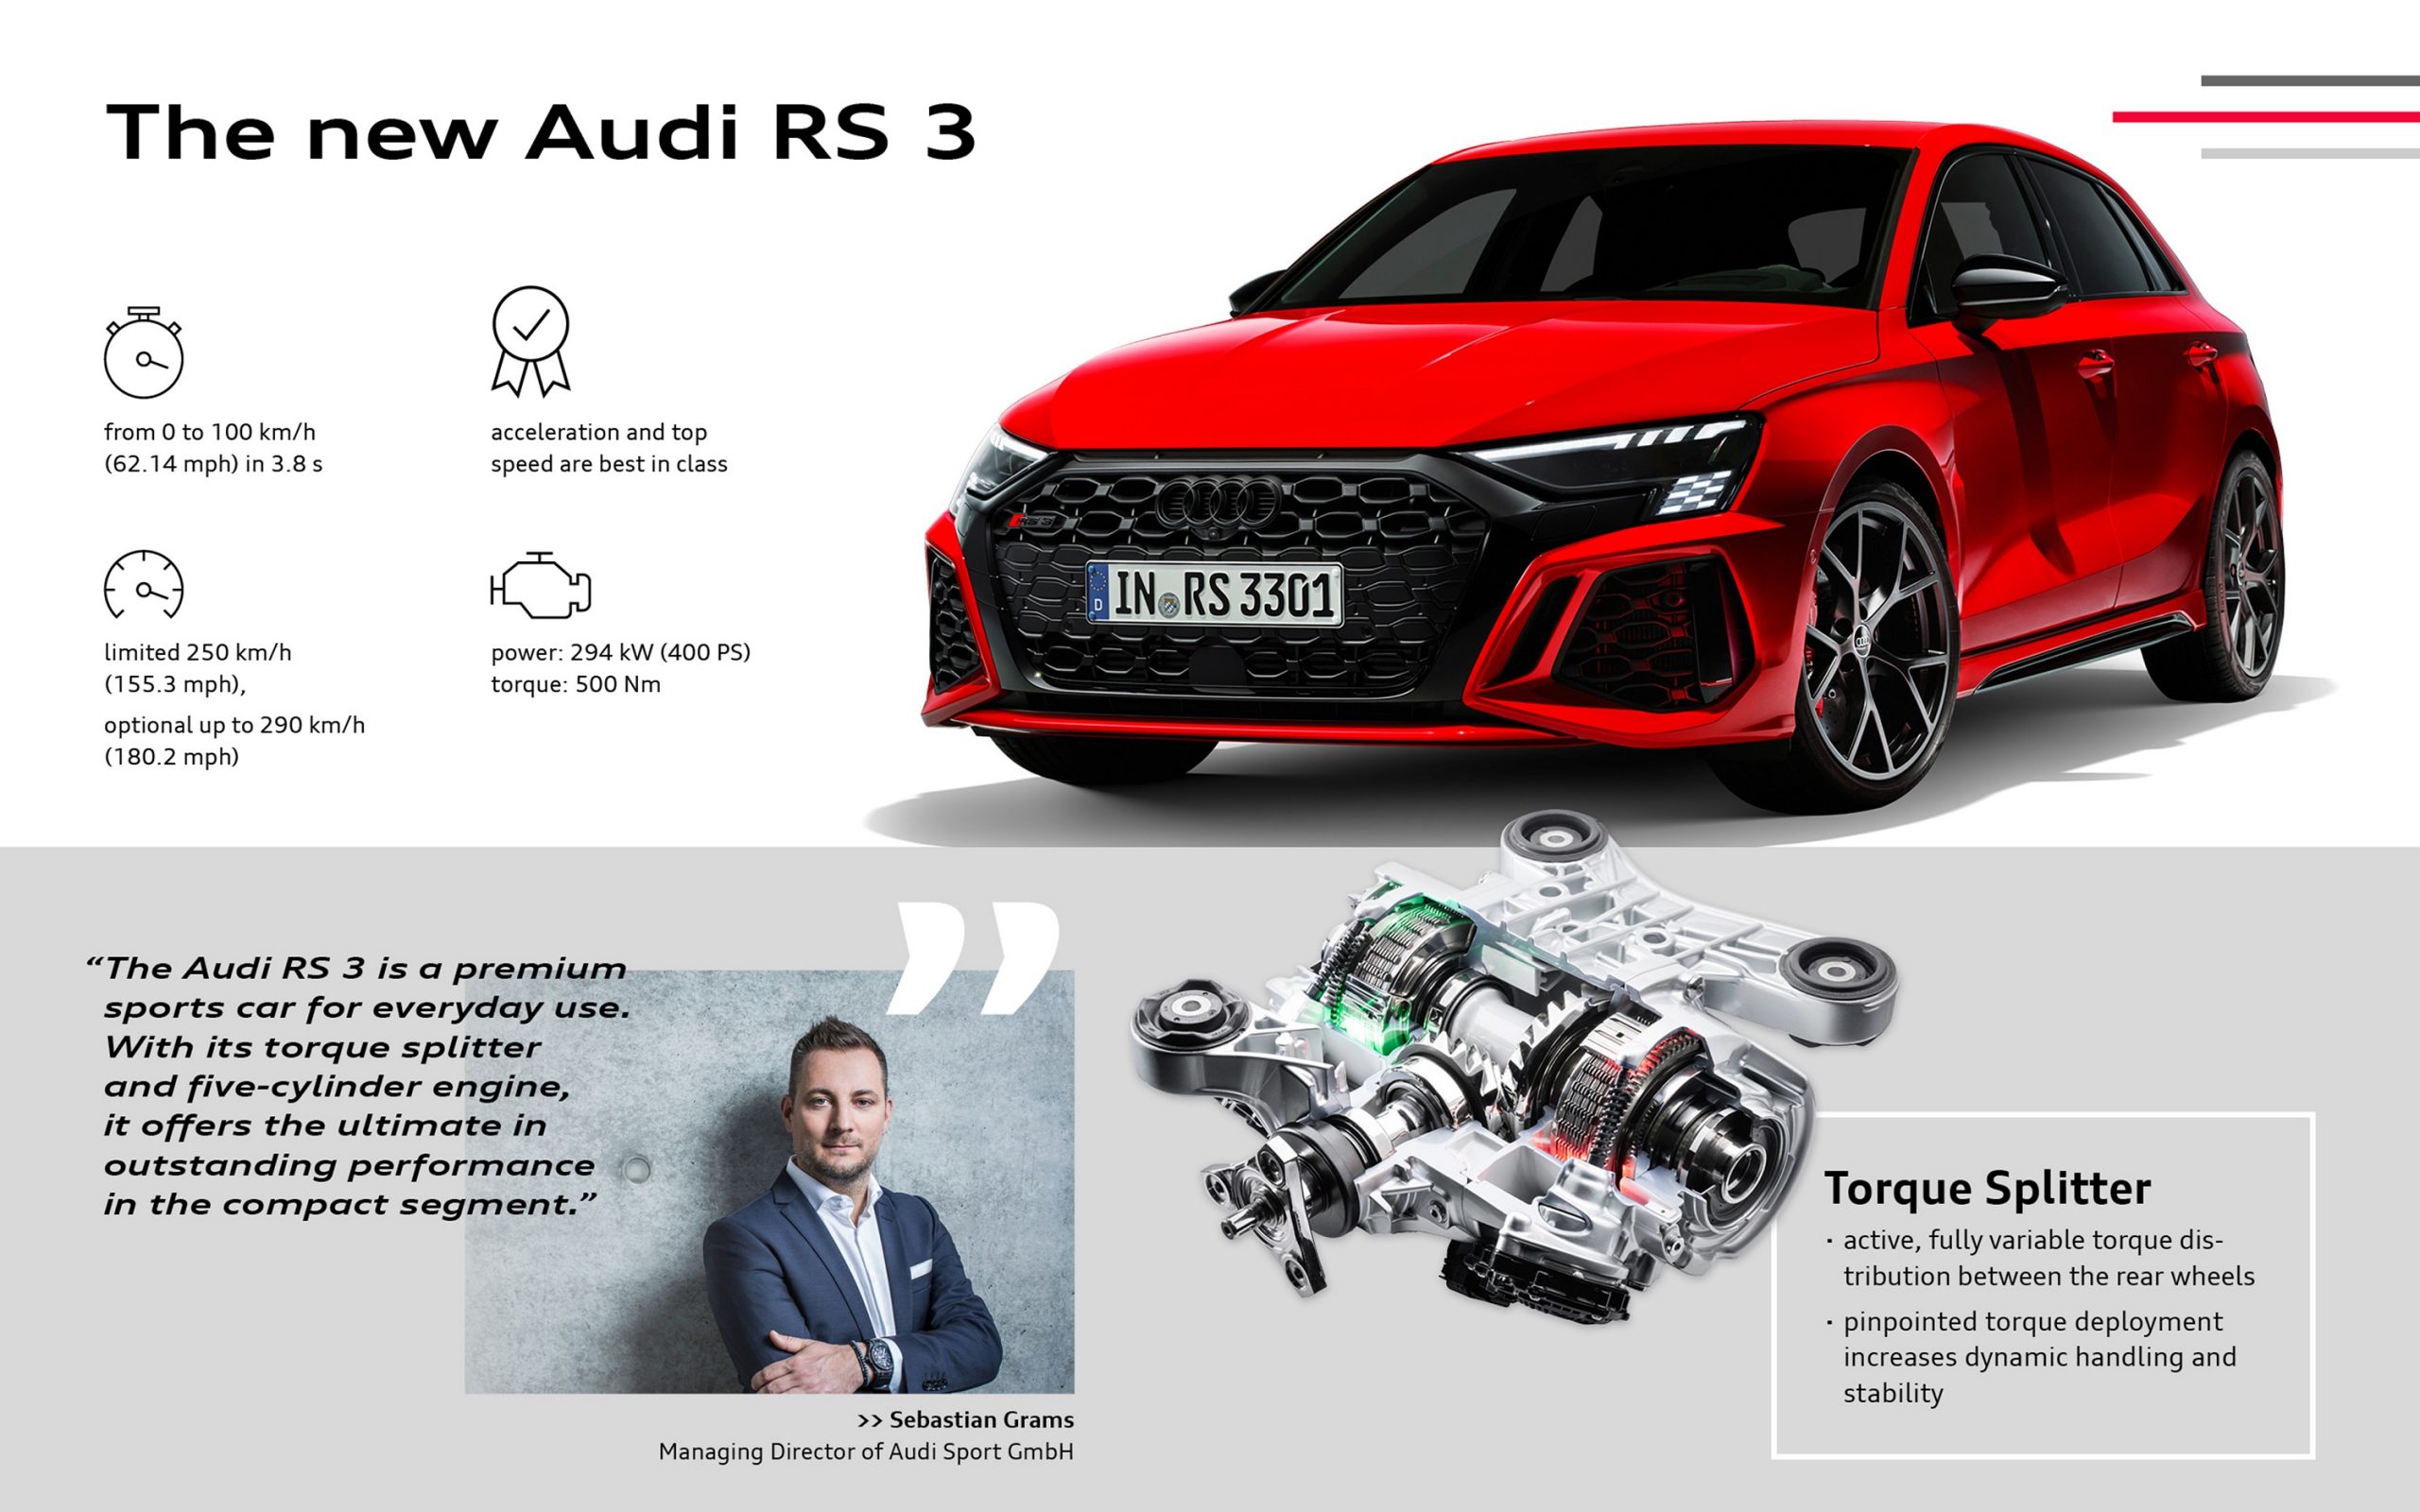 A diagram detailing the benefits of Audi's new torque splitting differential in the new RS3